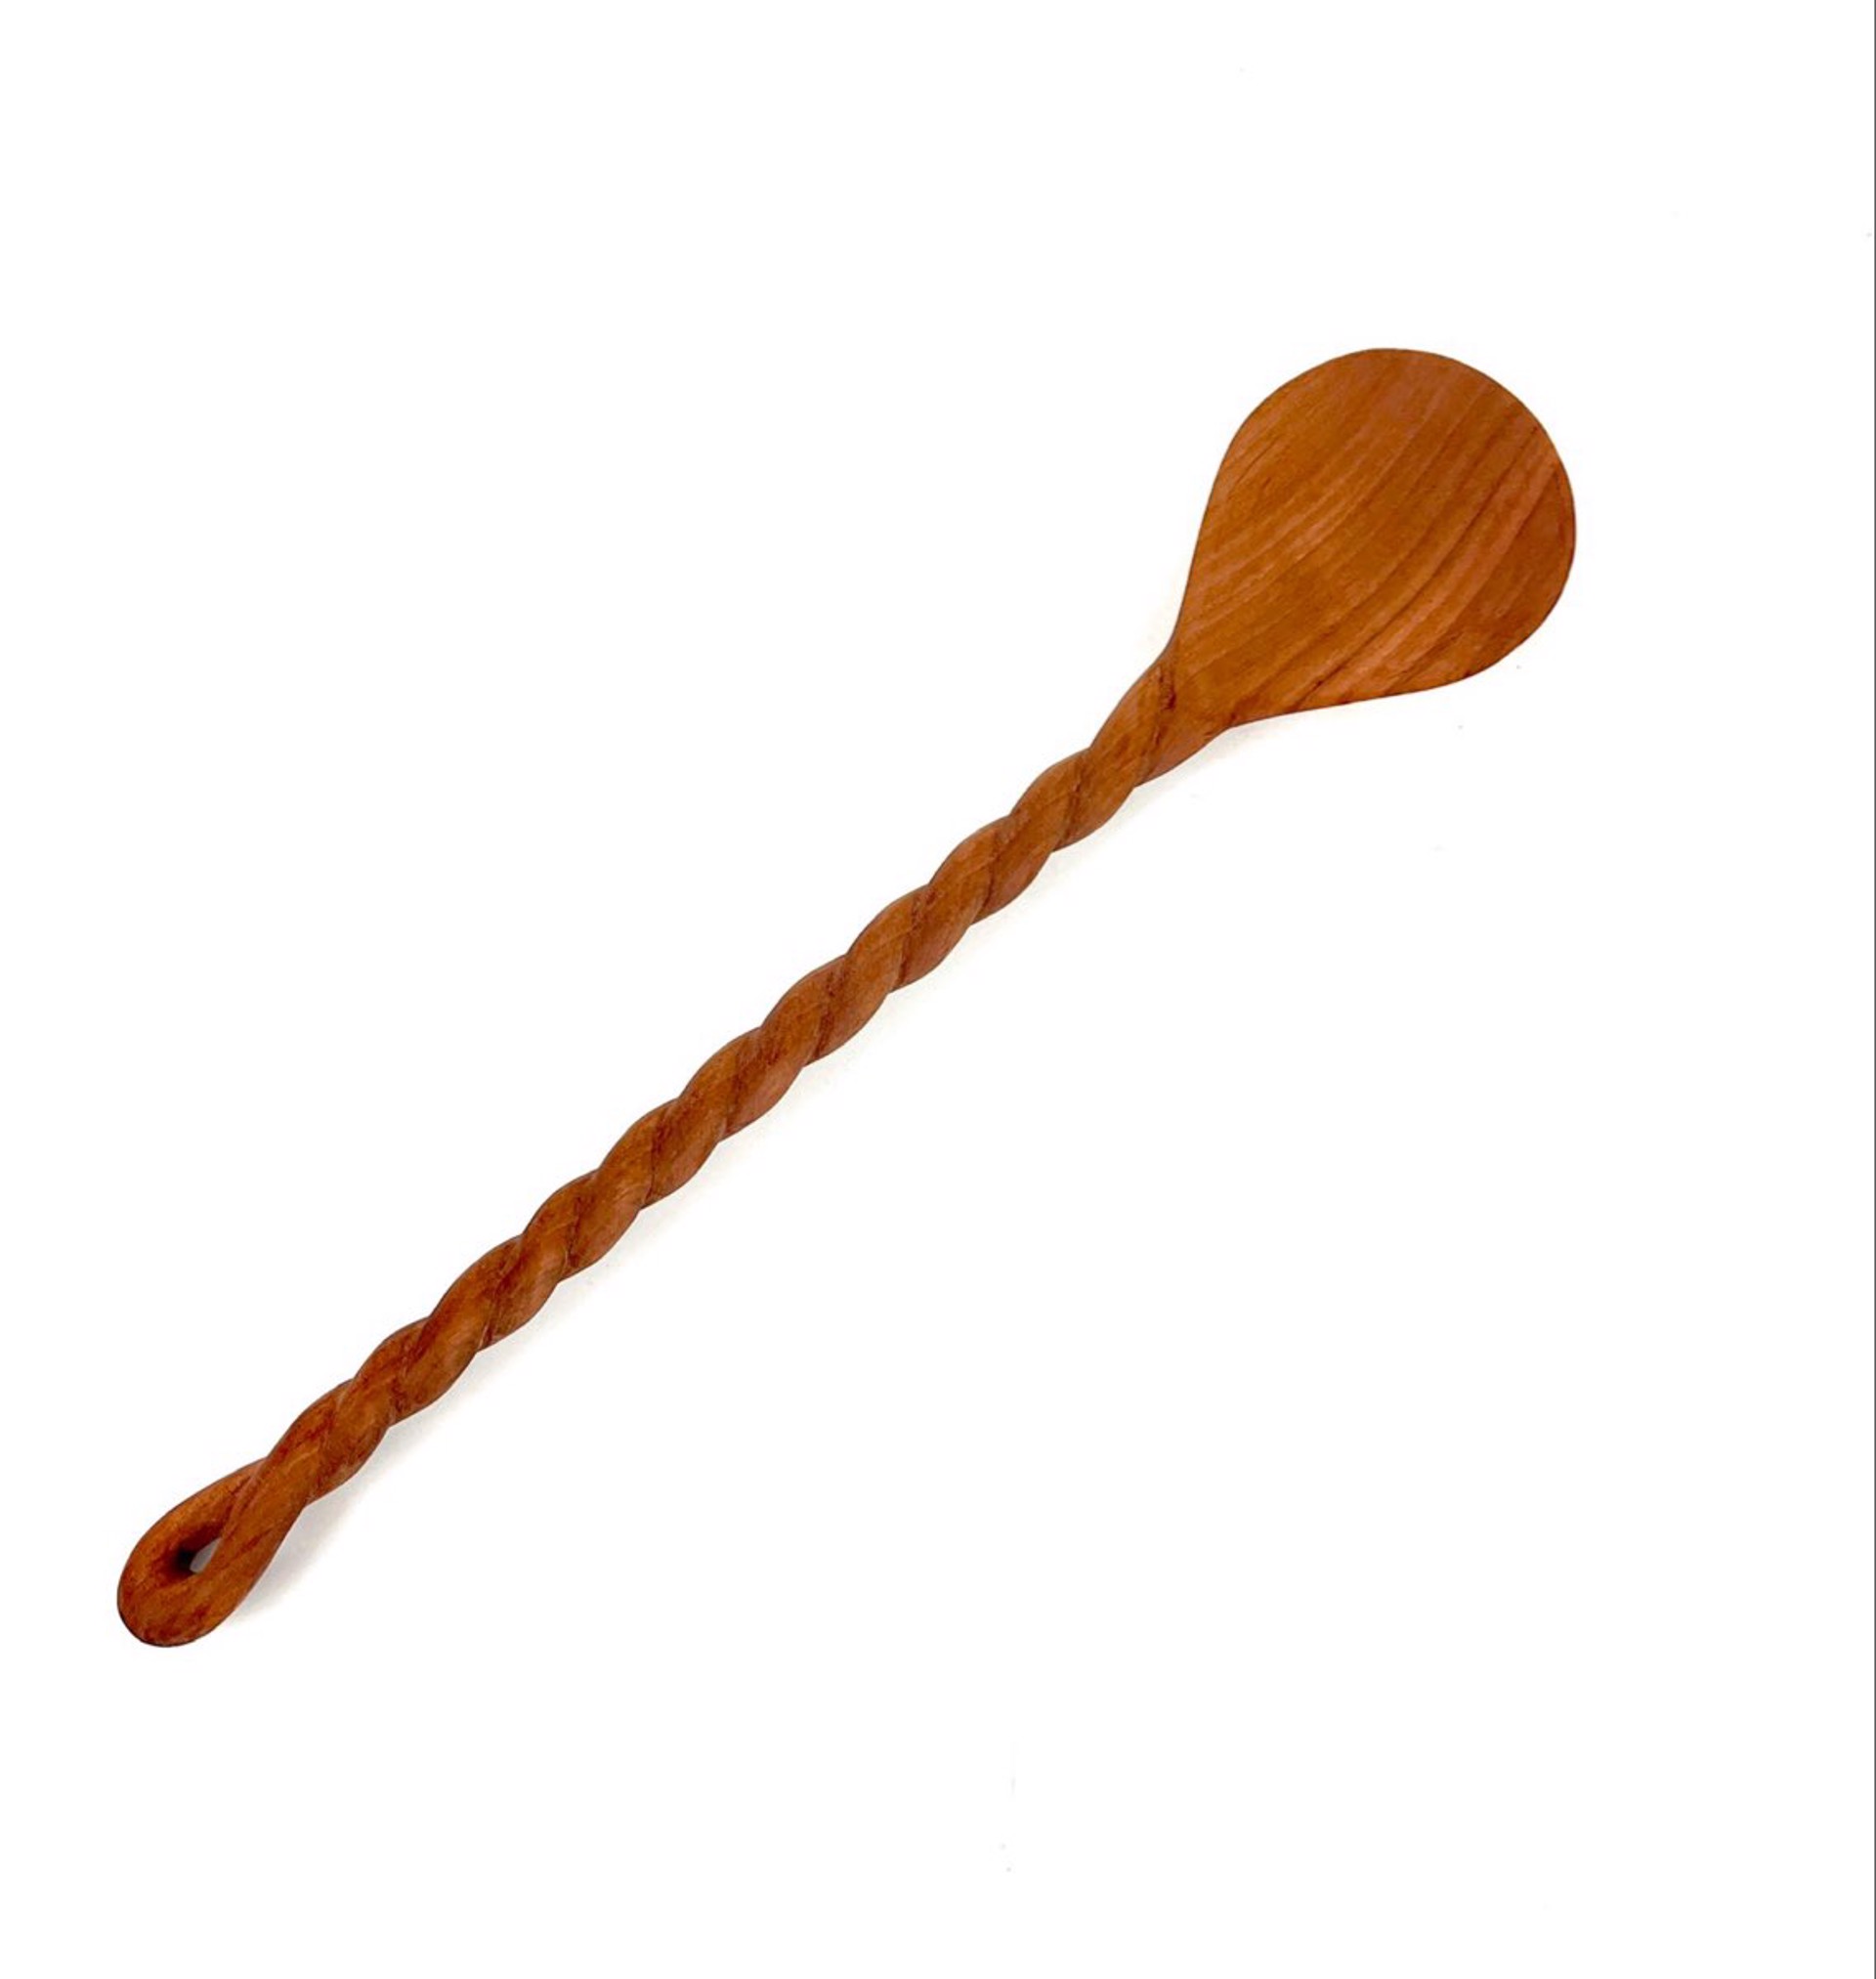 Hand-Carved Cherry Spoon by Traci Rhoades